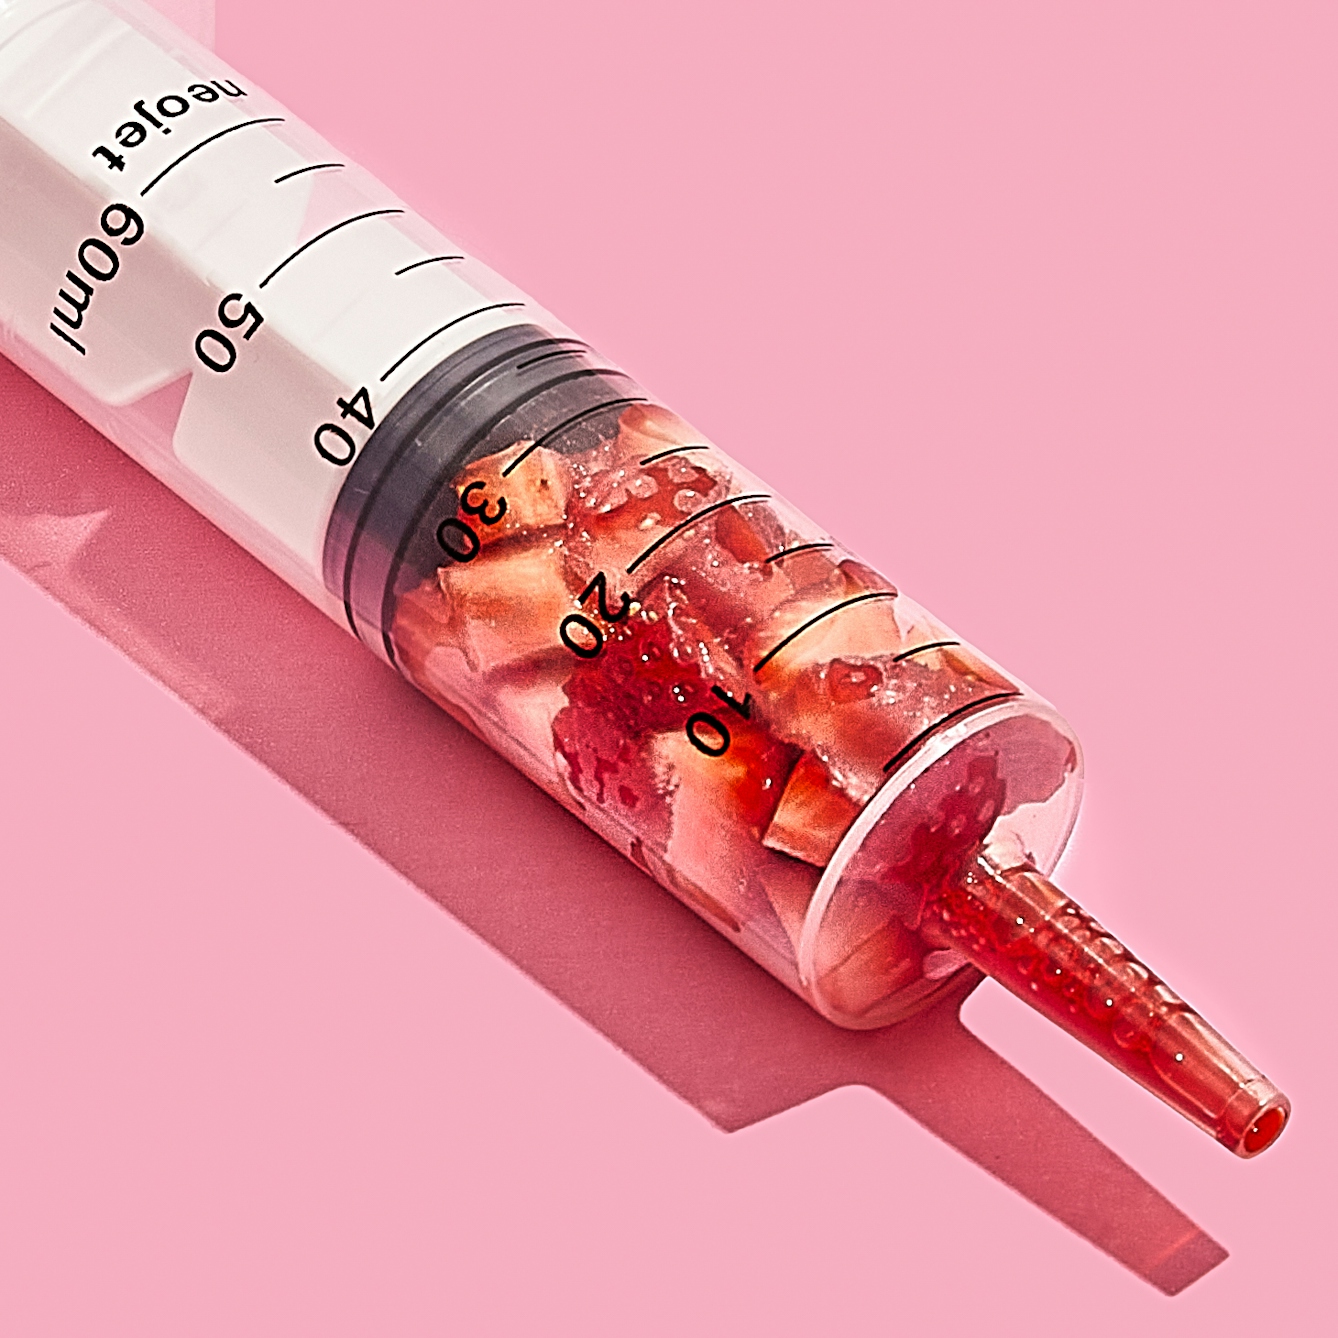 Photograph of a medical syringe lying on its side on a bright pink background. The syringe is full of chunks of cut up strawberry, compressed down into the lower half of the graduated tube. The nozzle of the syringe contains bright red strawberry juice. 